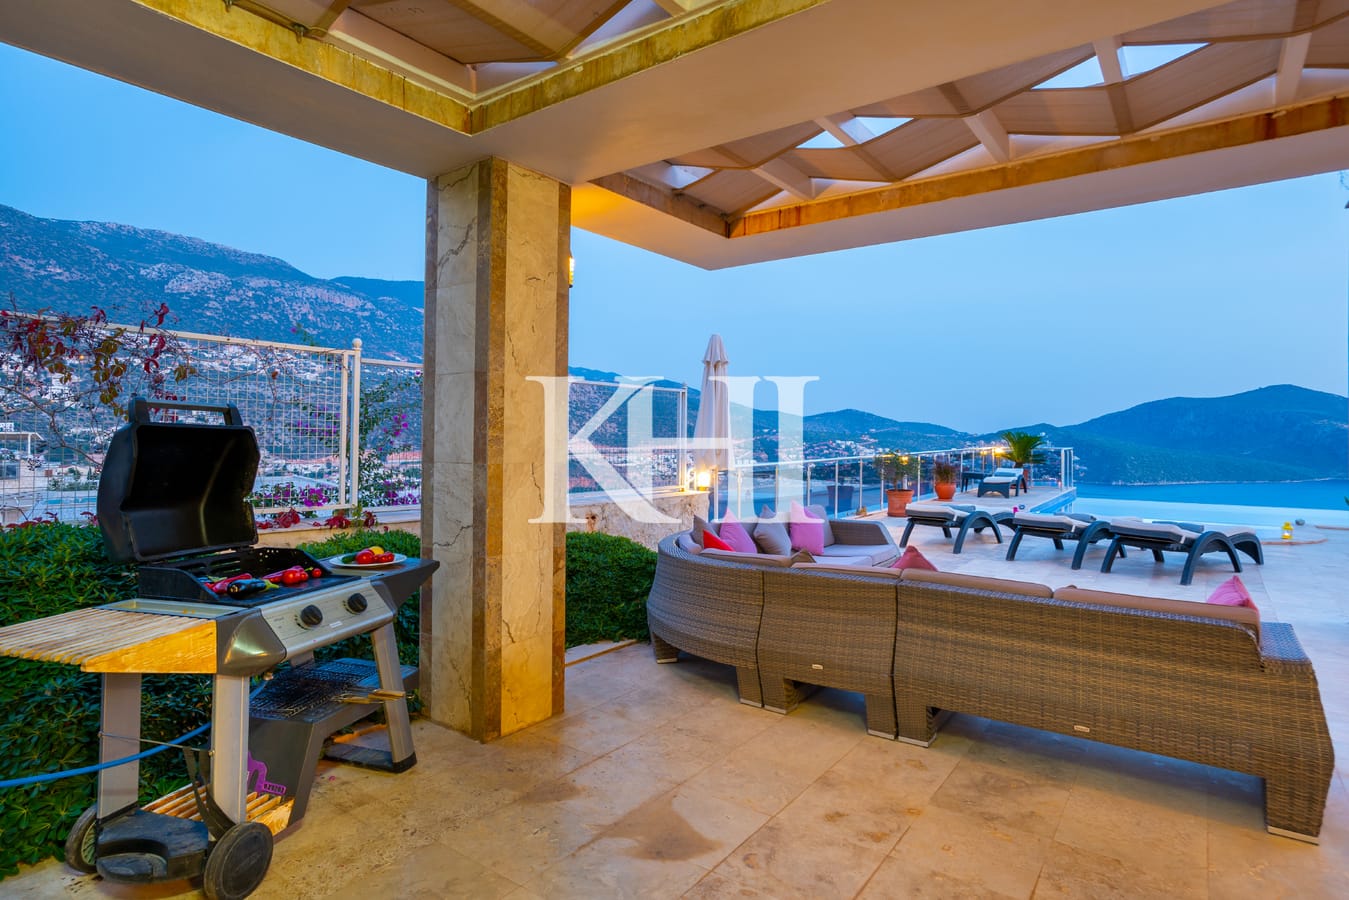 Detached Villa For Sale With Panoramic Kalkan View Slide Image 10